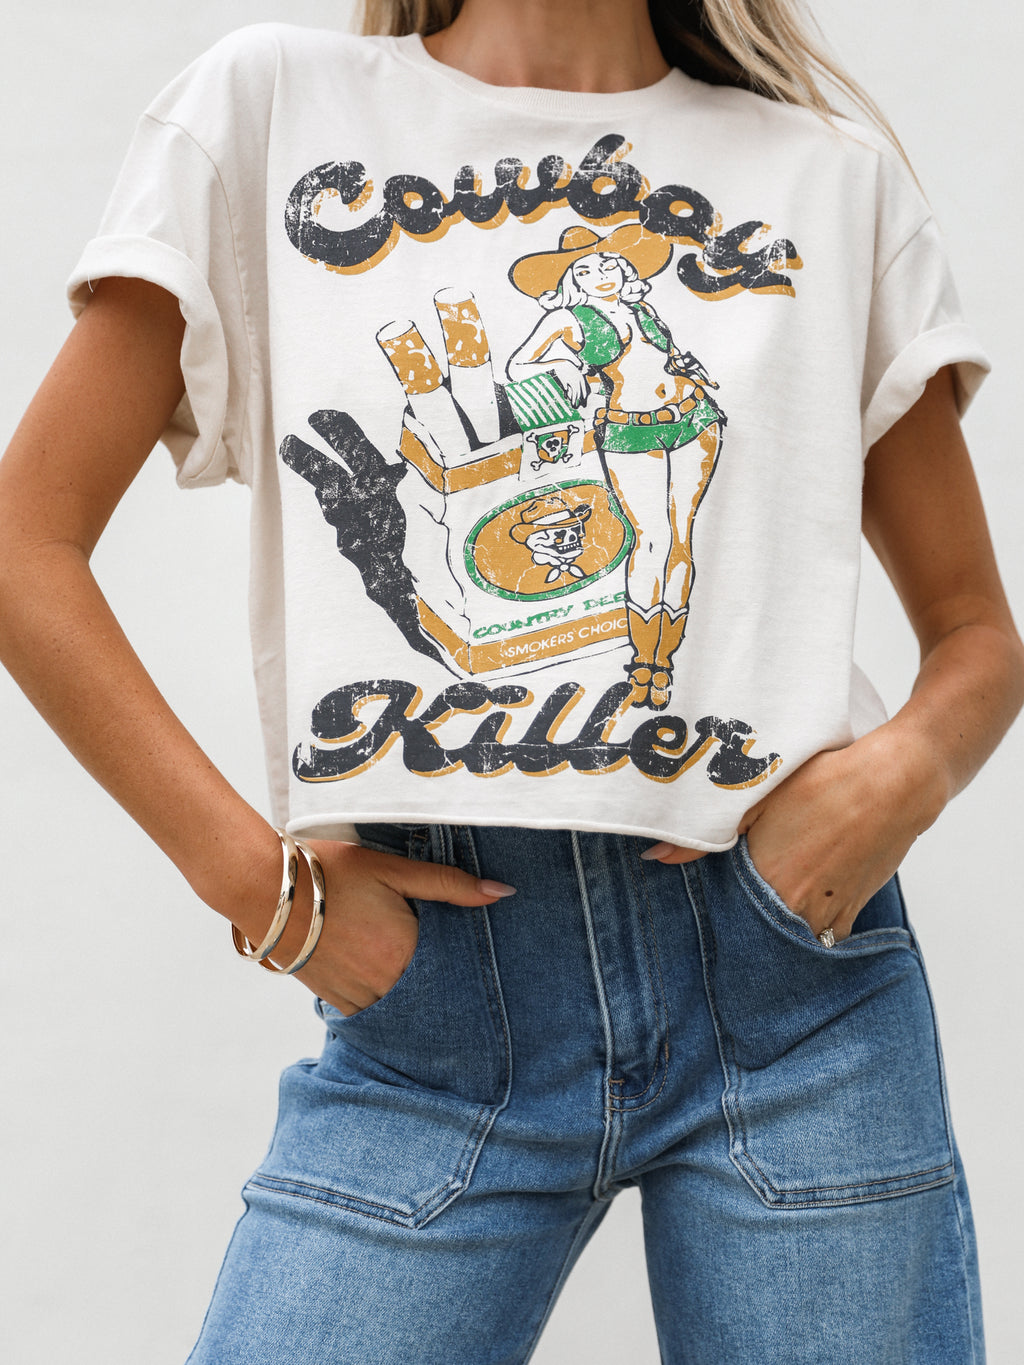 Cowboy Killer Graphic Tee - Stitch And Feather